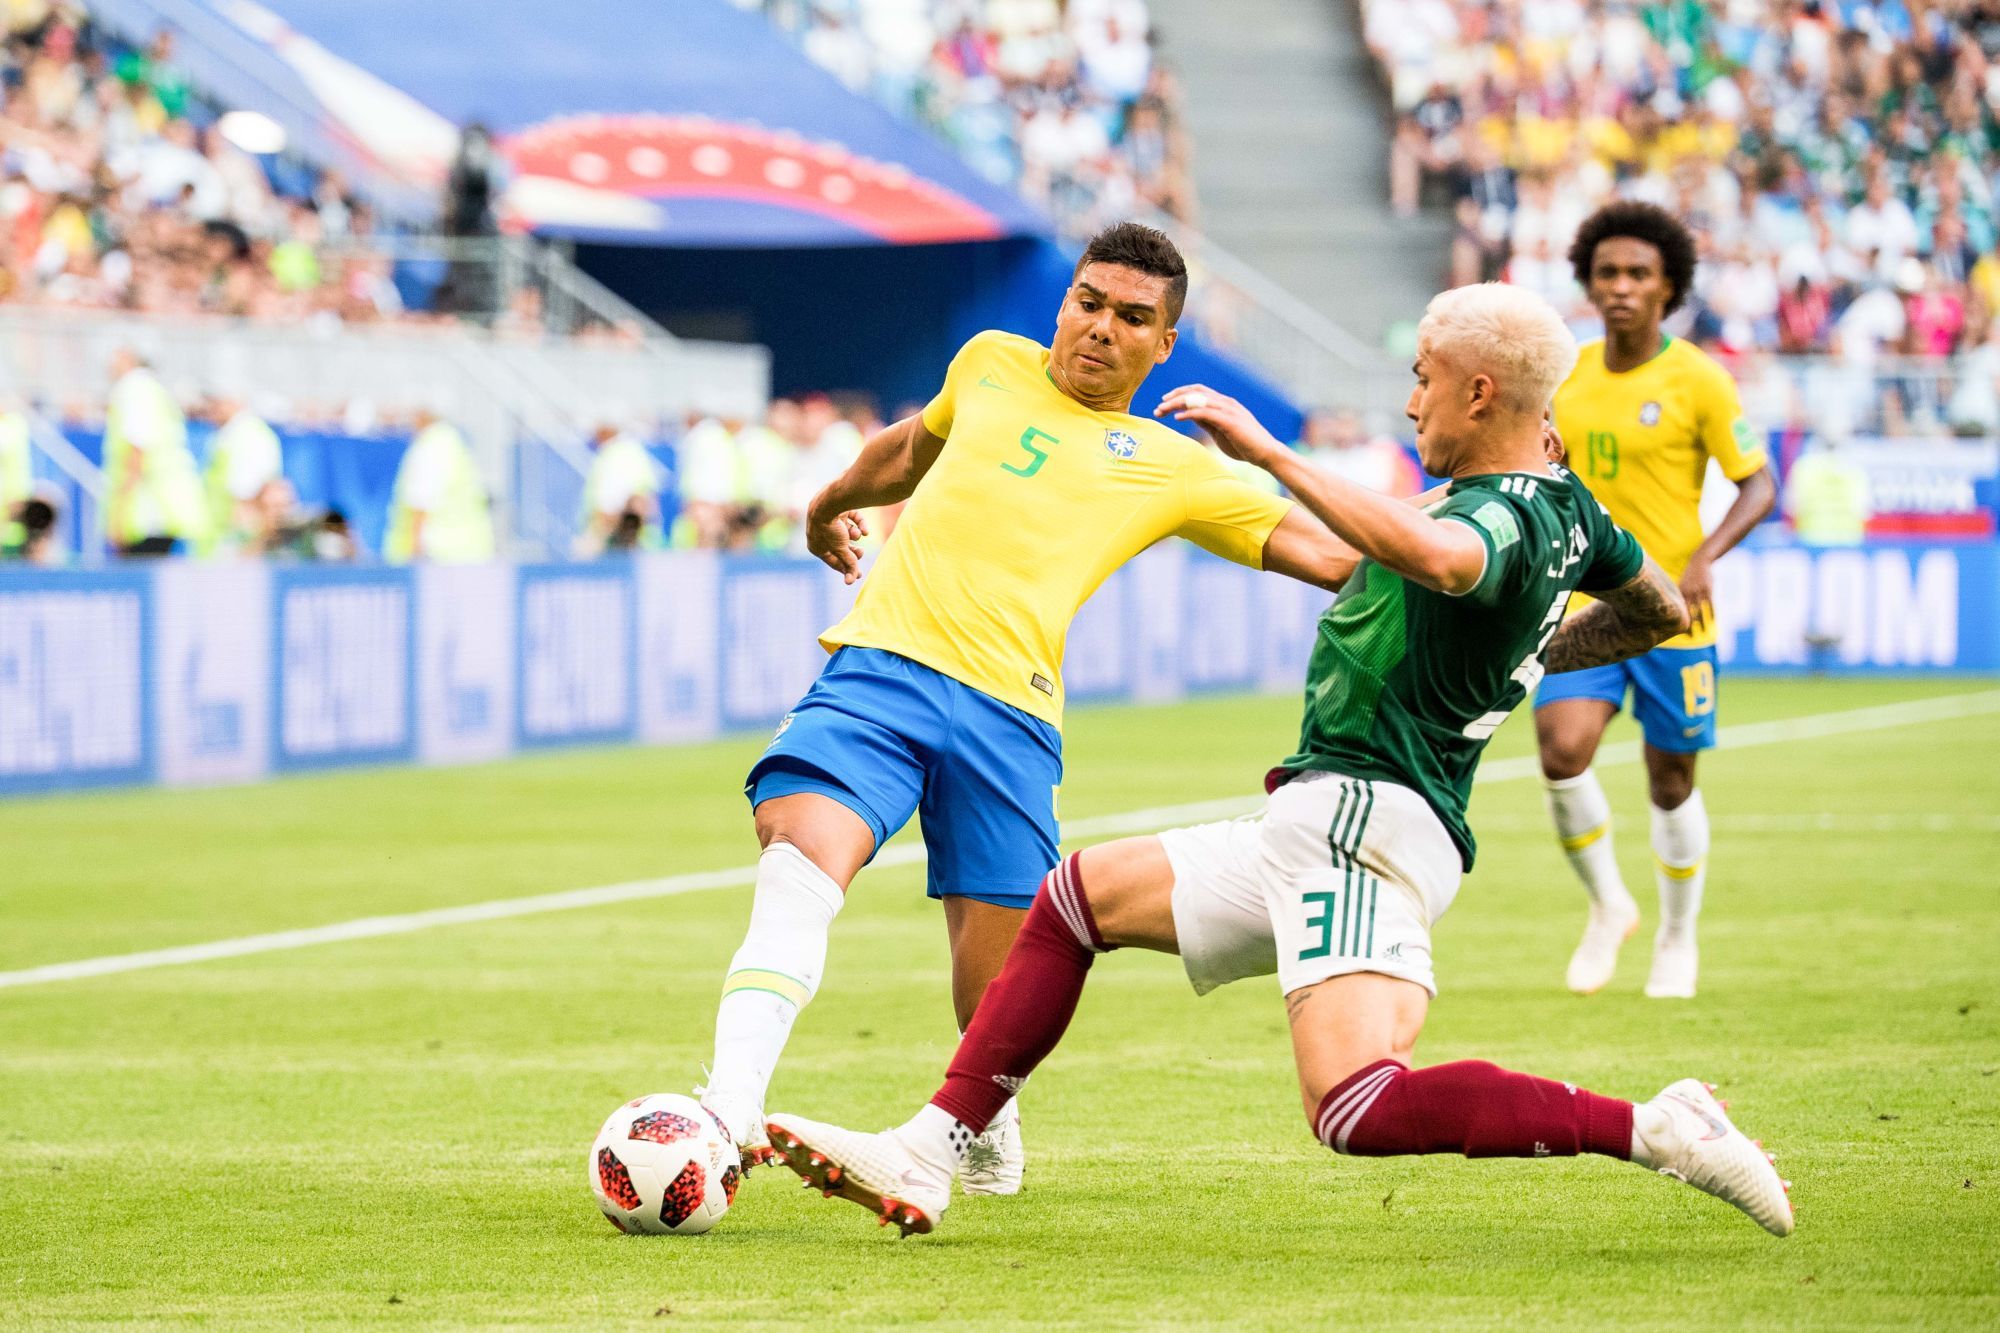 Casemiro of Brazil and Carlos Salcedo of Mexico during the FIFA World Cup round of 16 match between Brazil and Mexico on July 2, 2018 in Samara.
Photo : Bildbyran / Icon Sport